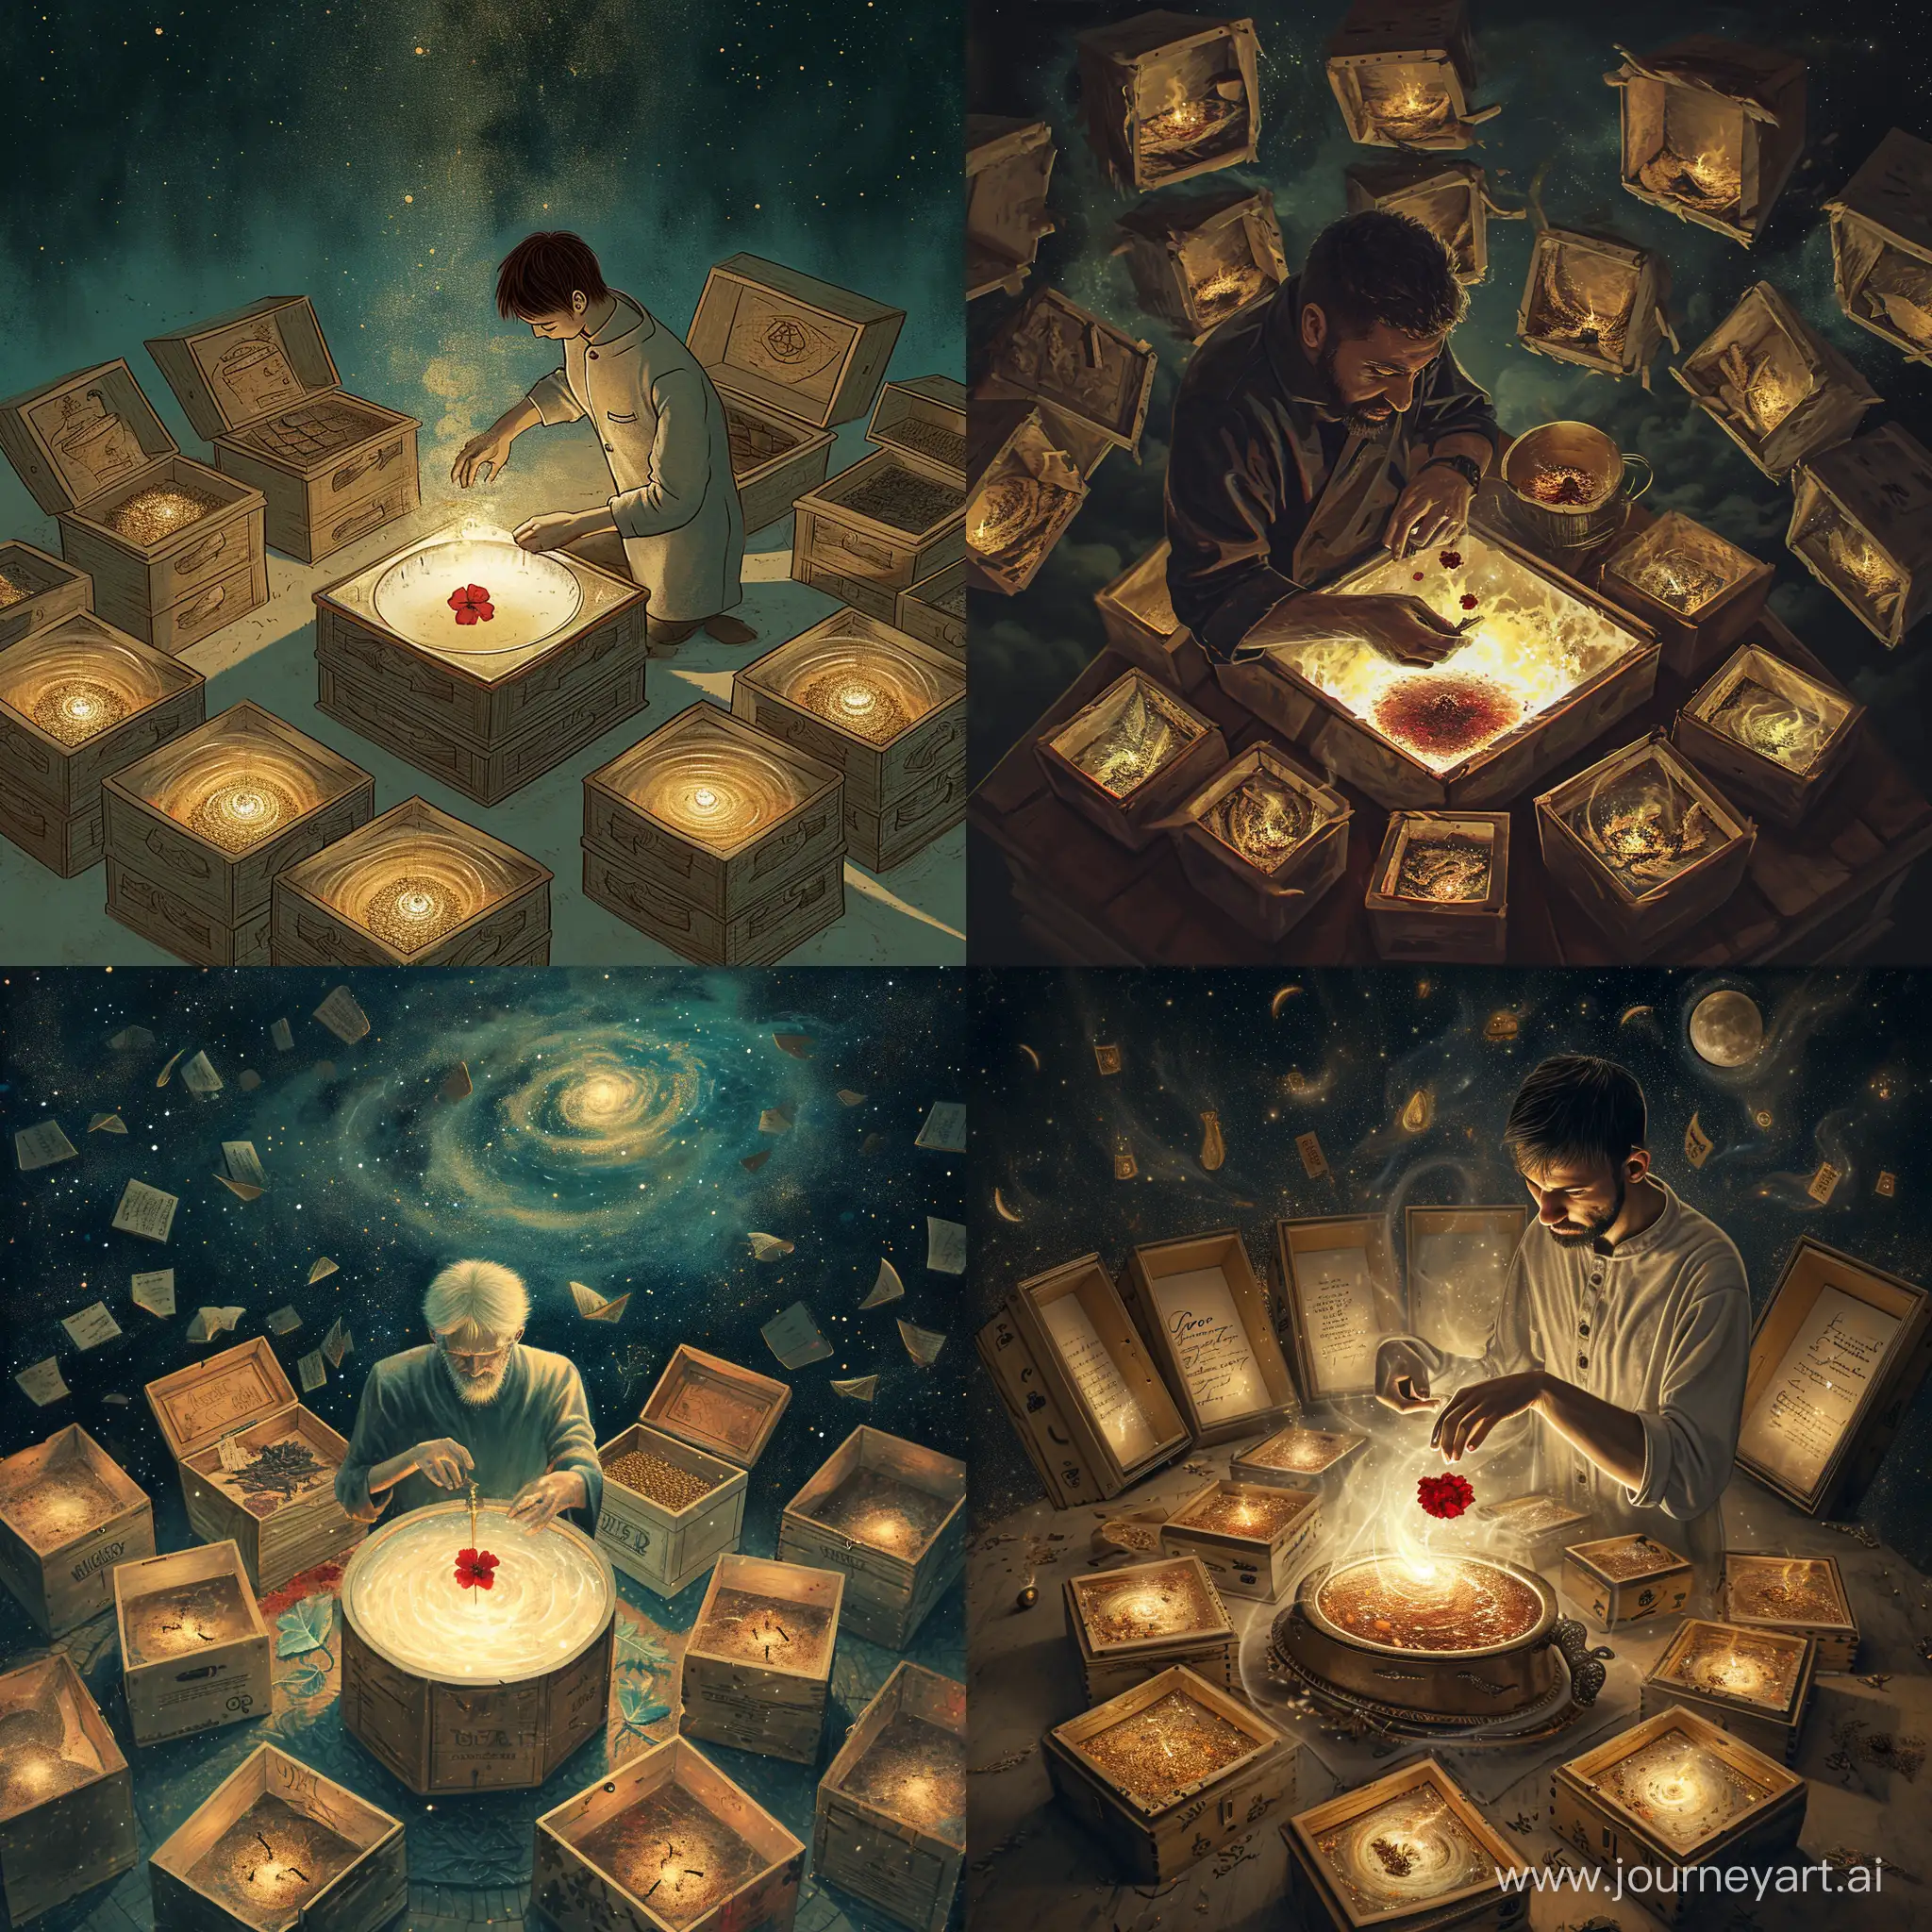 In the moonlight, the alchemist prepares his infusion, a potion for love and reciprocity. Around him are a dozen open wooden boxes. He carefully puts the ingredients into a bowl - a pinch of finely ground spice, a bit of viscous ink tincture. And the final touch is one red carnation. As the potion boils, it begins to glow, emitting a light that warms the entire room